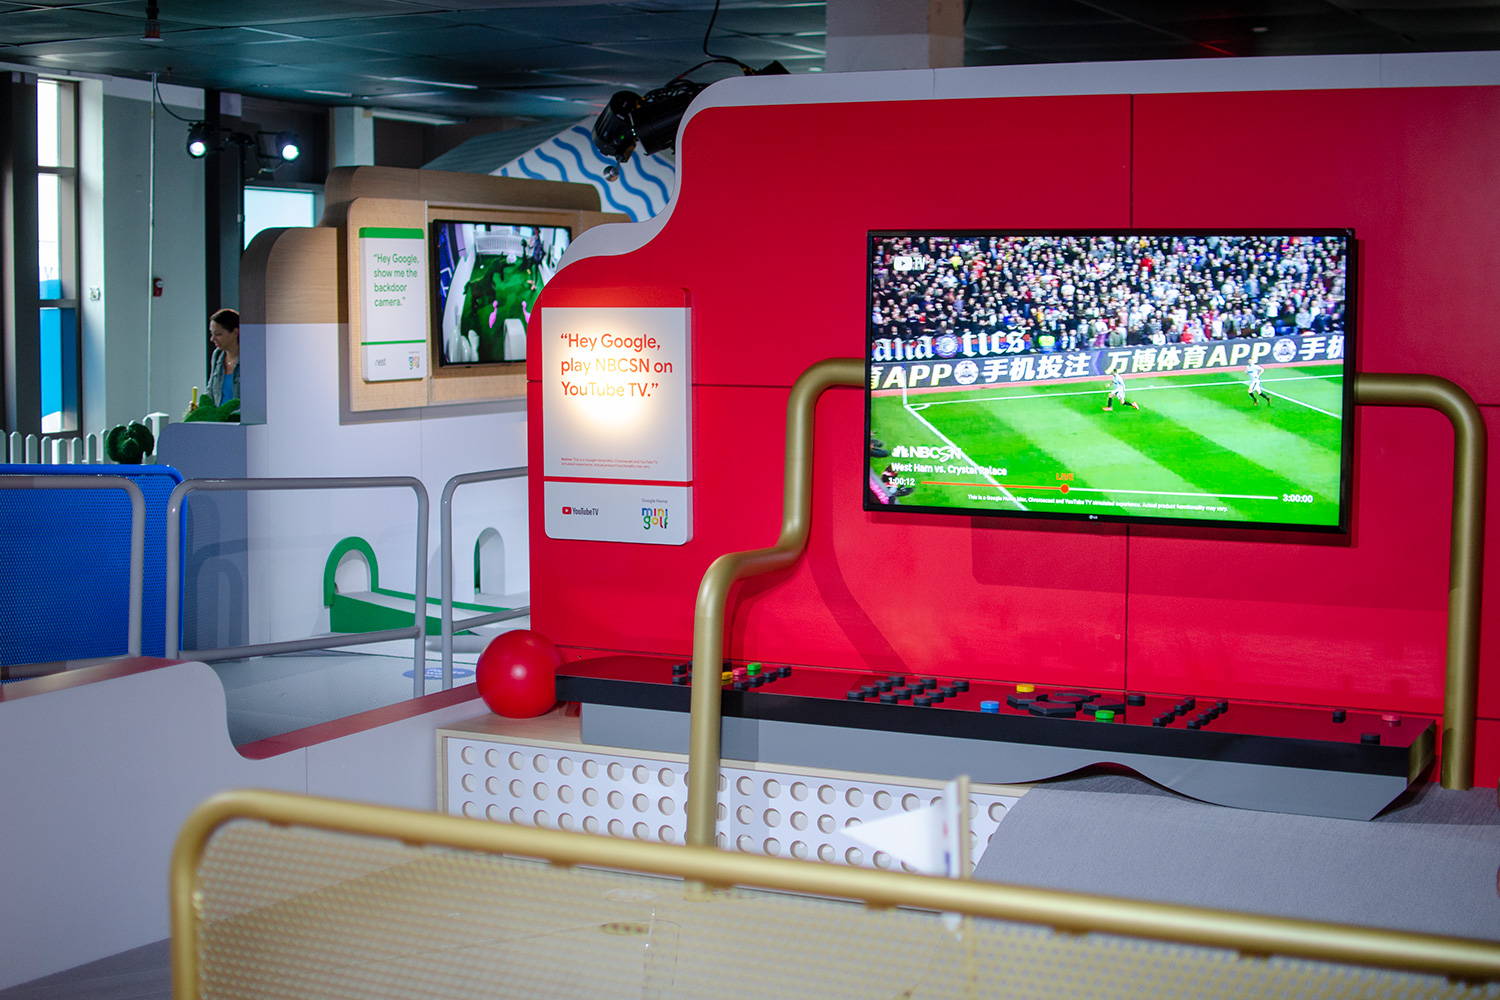 googles mini golf pop up event in nyc highlights its smart home products google tv soccer